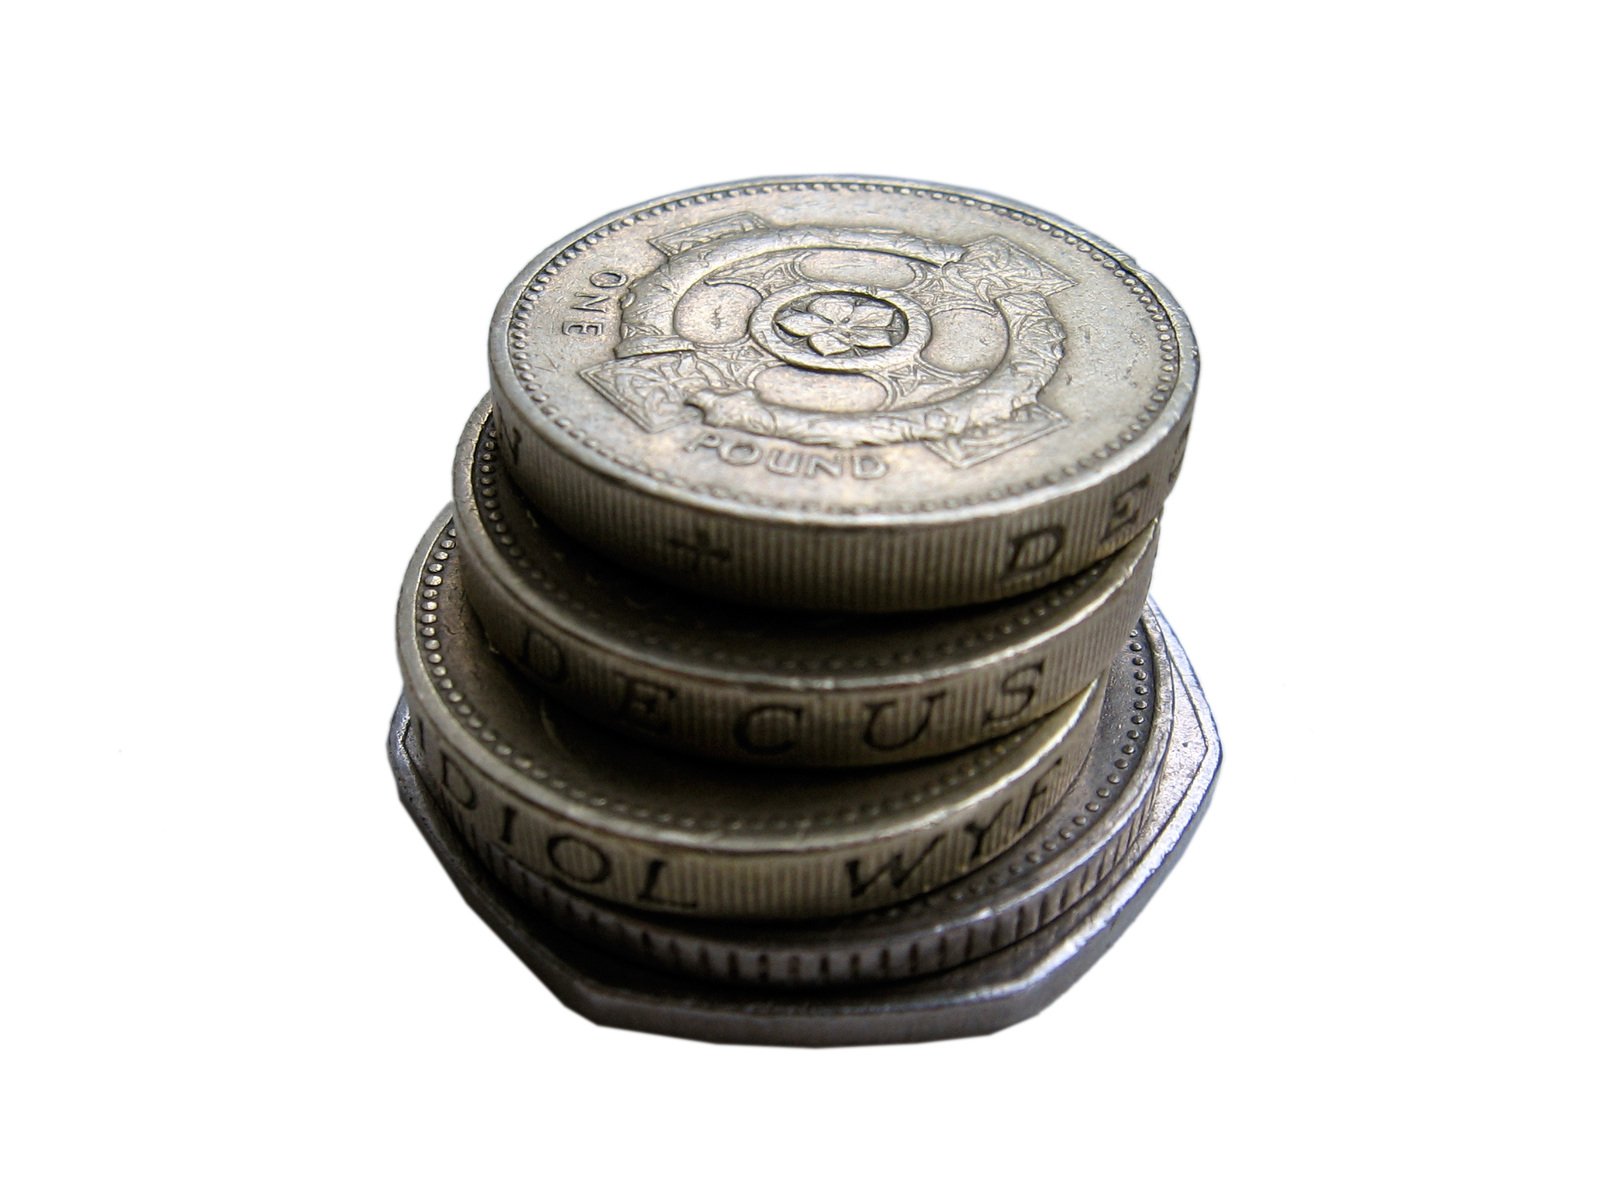 four stacks of pound coins stacked on top of each other